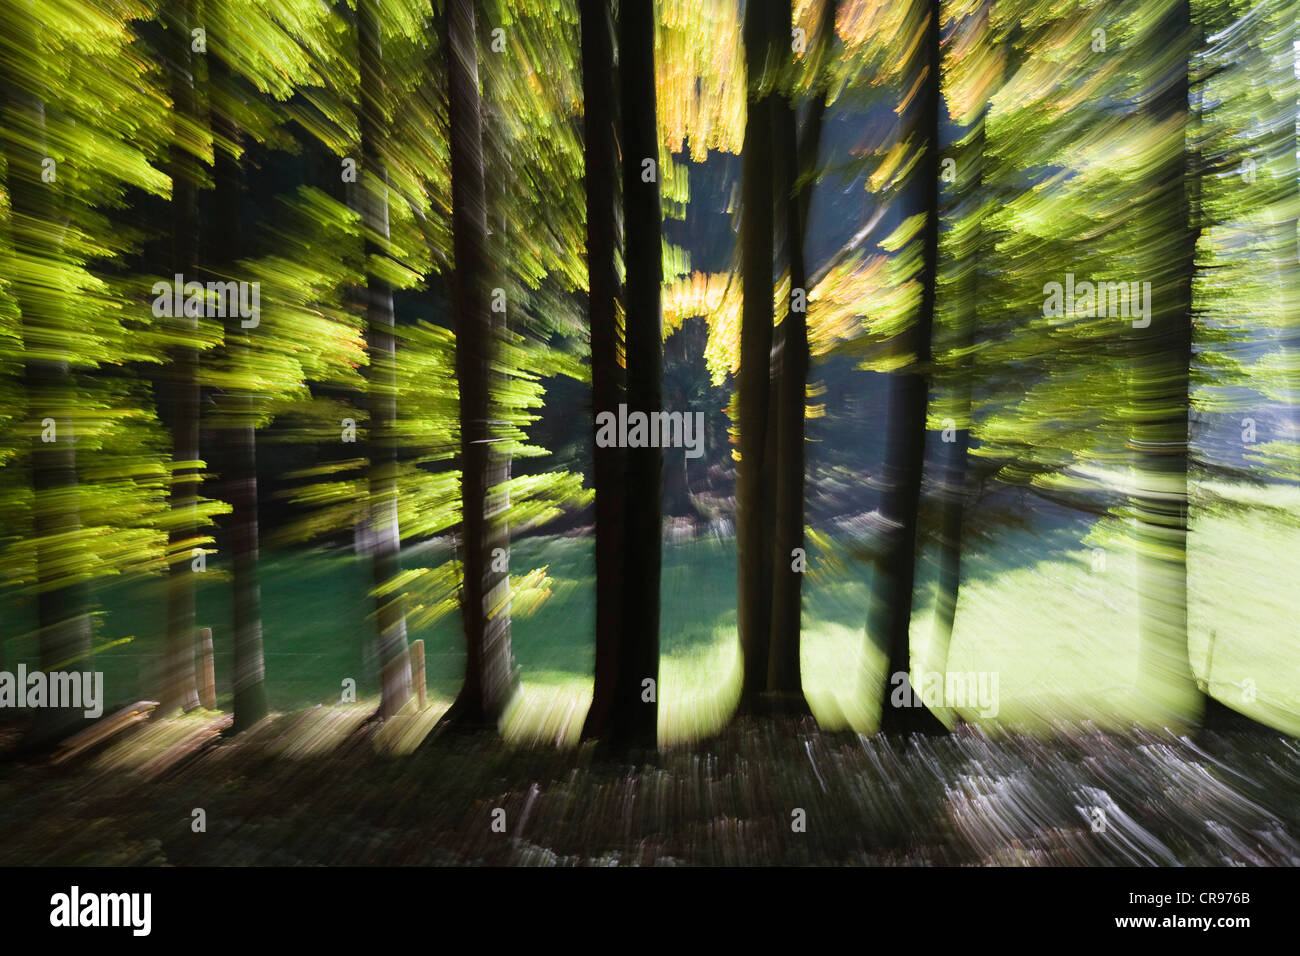 Forest-impression in autumn, Germany, Europe Stock Photo